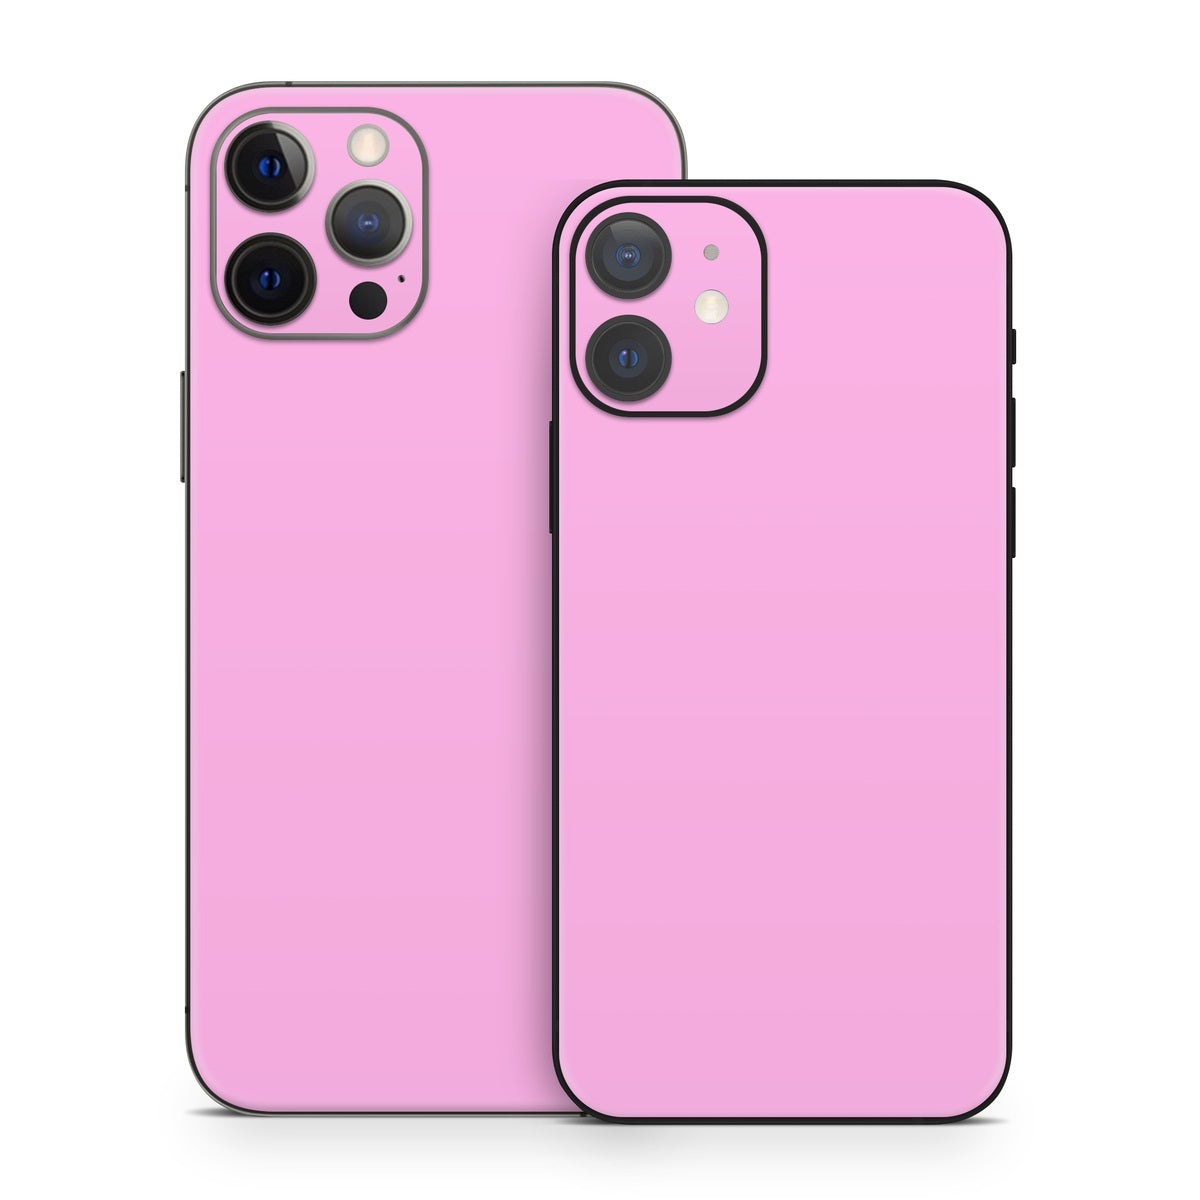 Solid State Pink - Apple iPhone 12 Skin